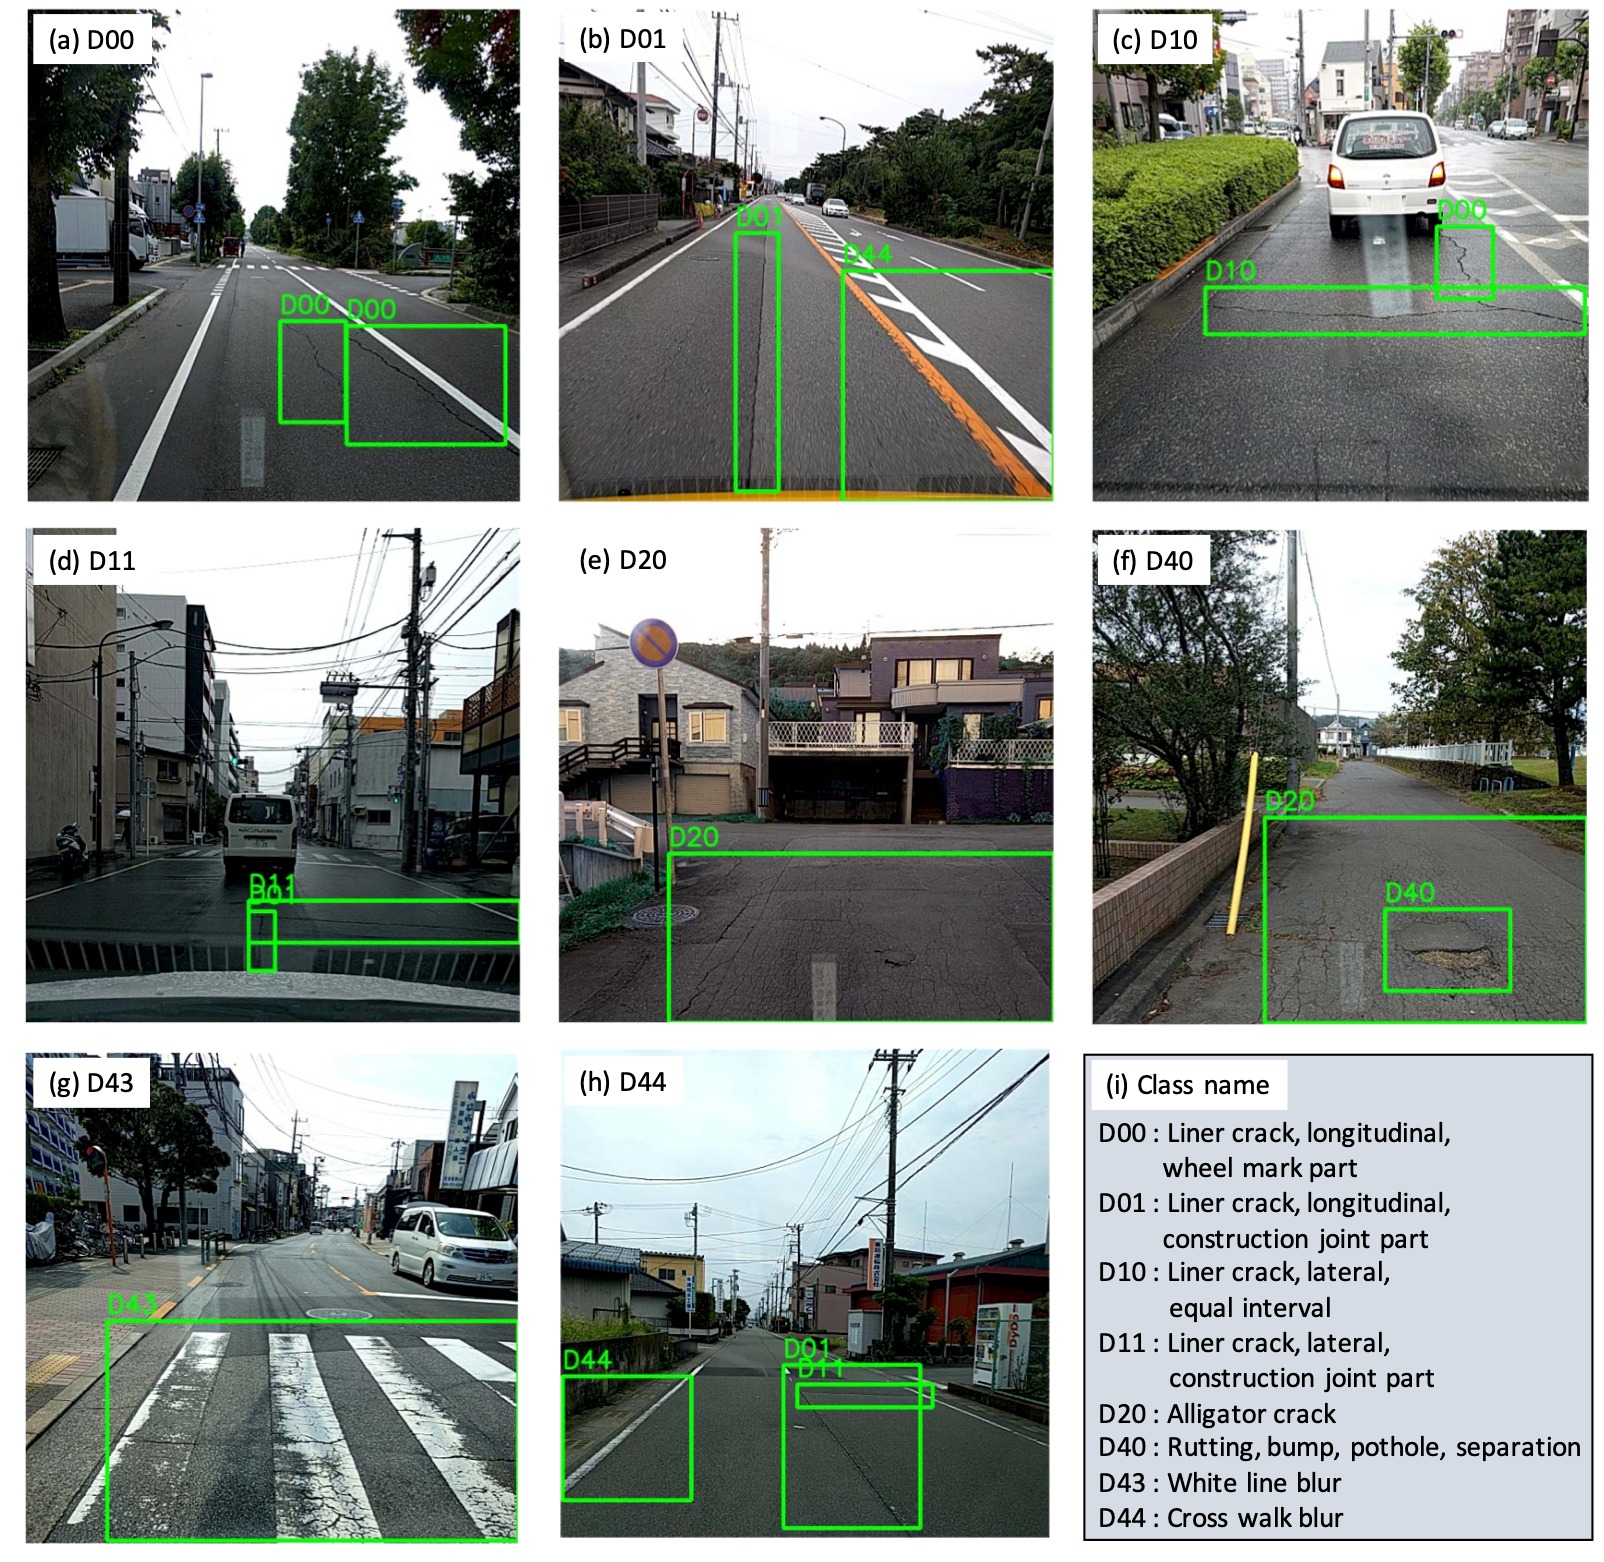 Examples of a road-damage type that can be obtained using a smartphone